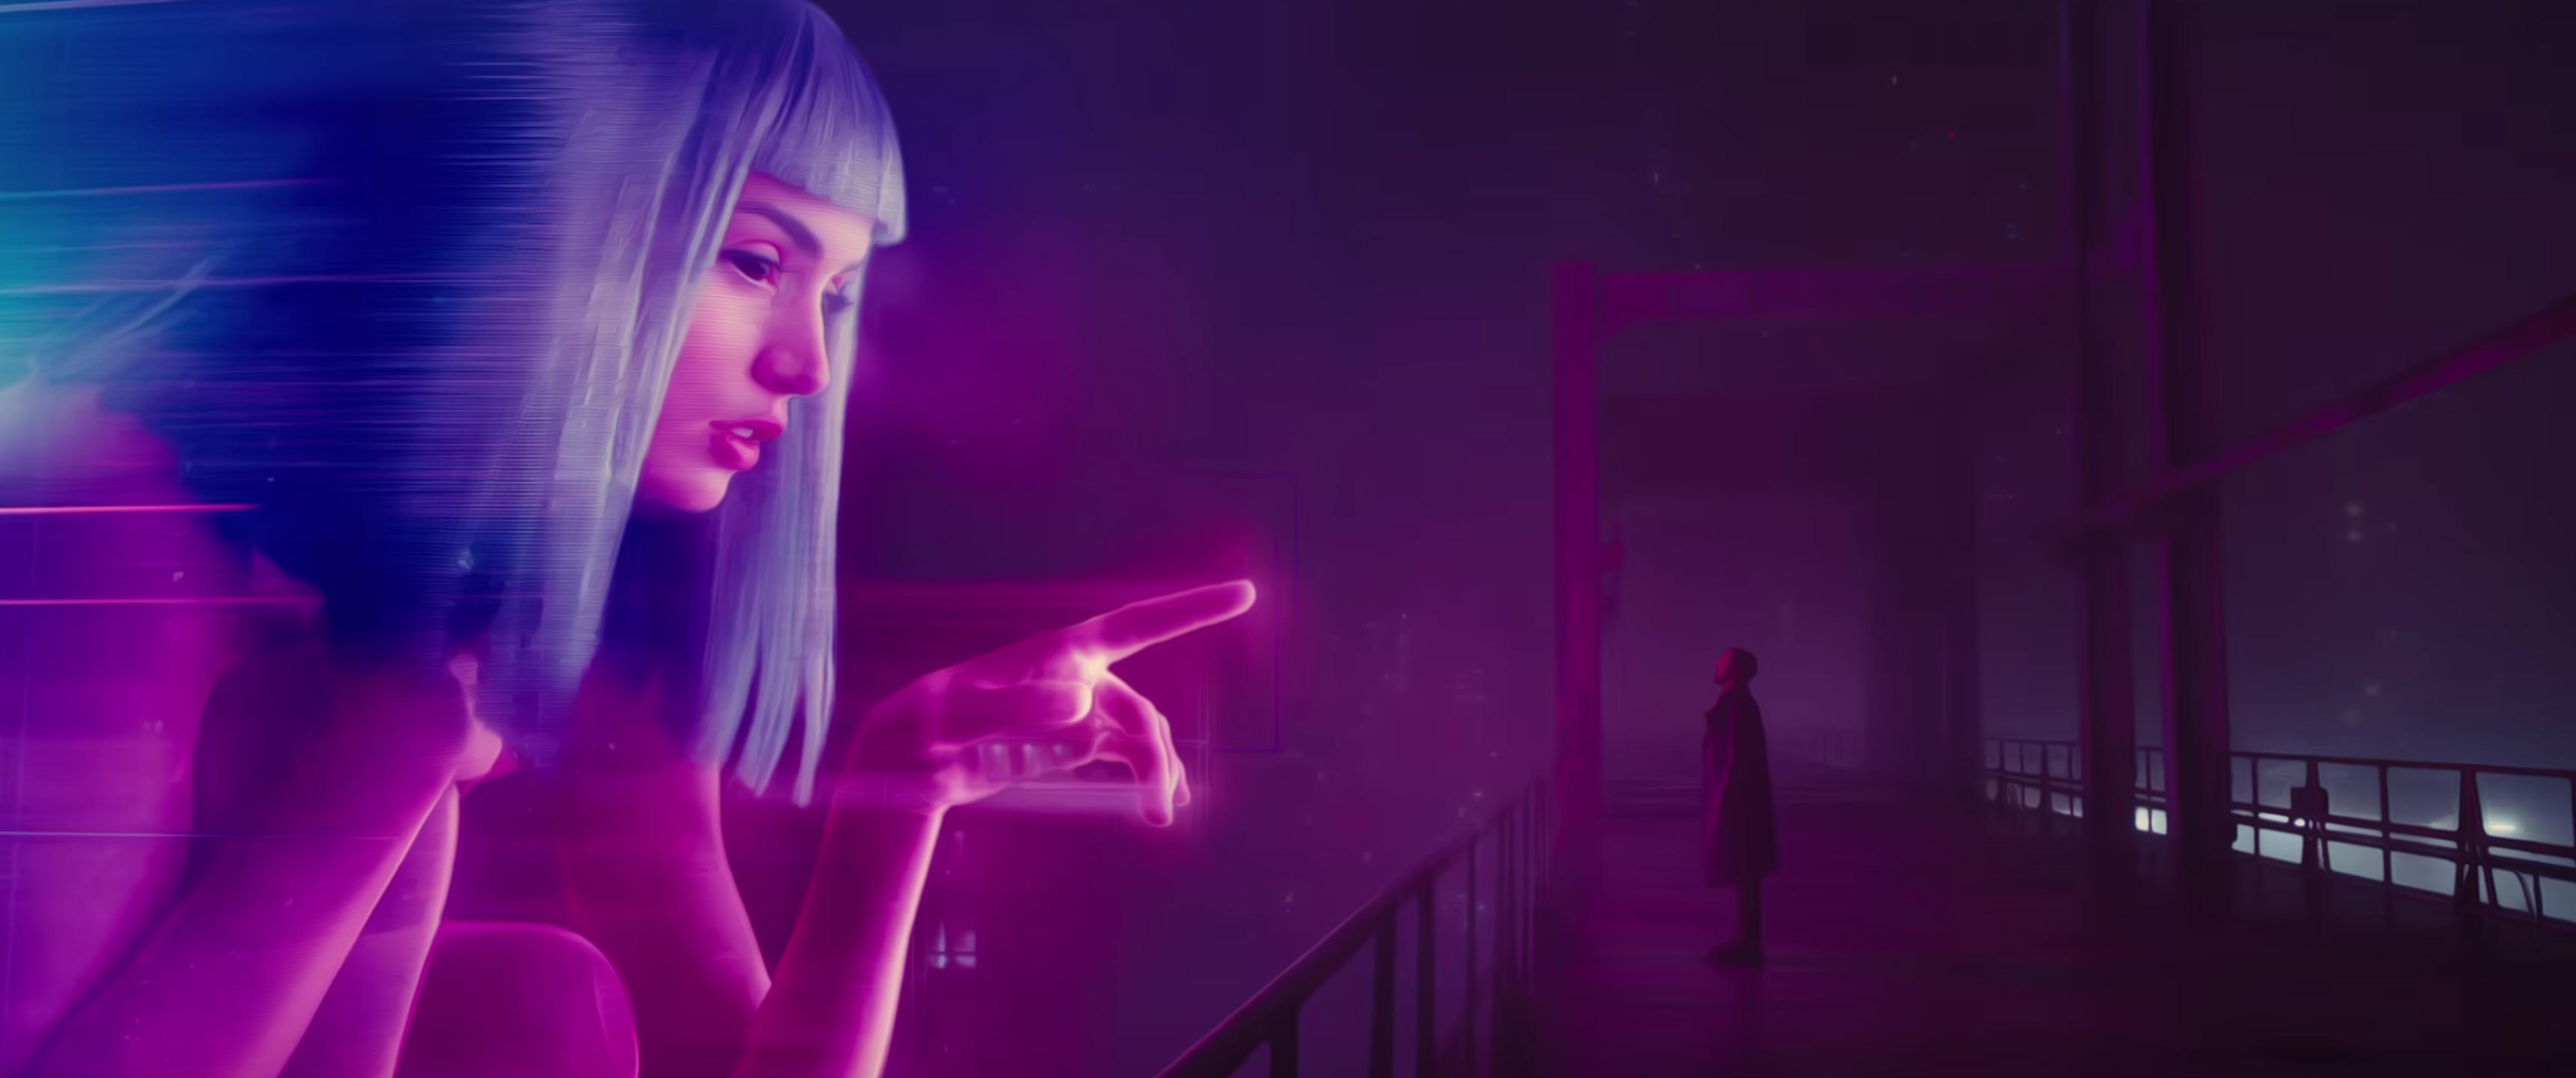 3440 x 1440 · png - [Request] 3840x1080 of this Blade Runner 2049 Wallpaper! Would be ...